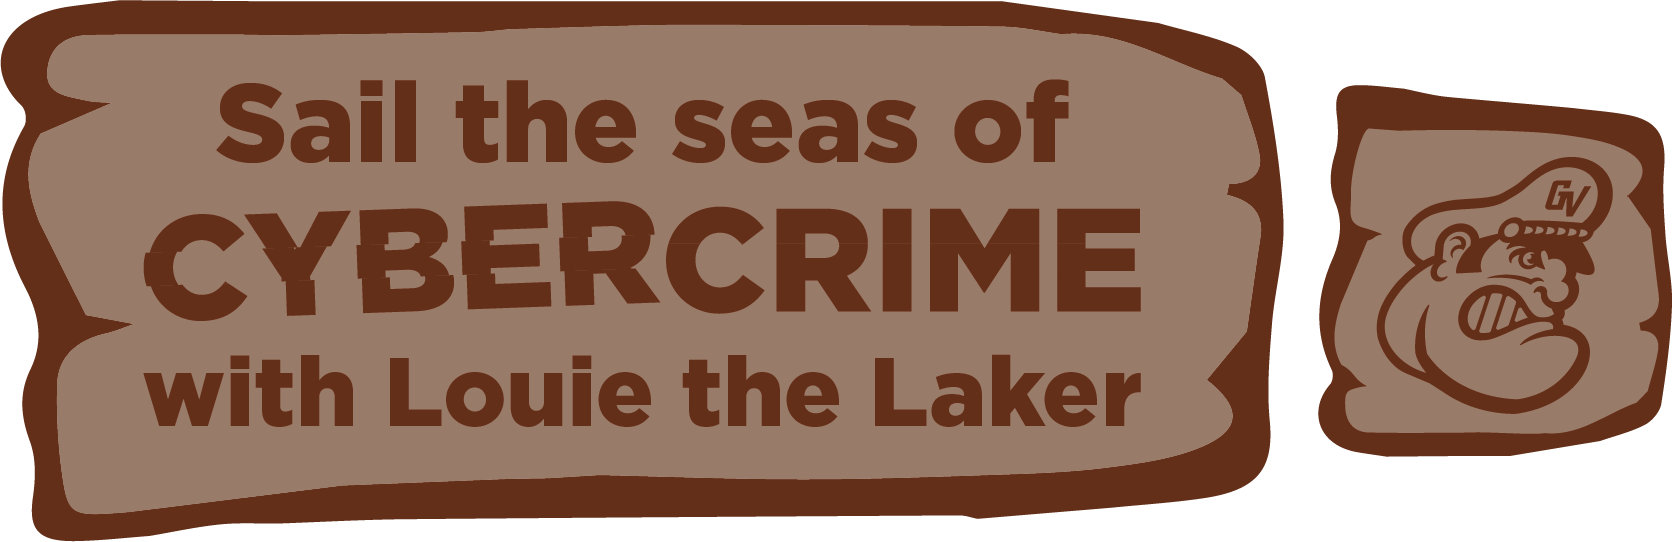 Sail the seas of Cybercrime with Louie the Laker